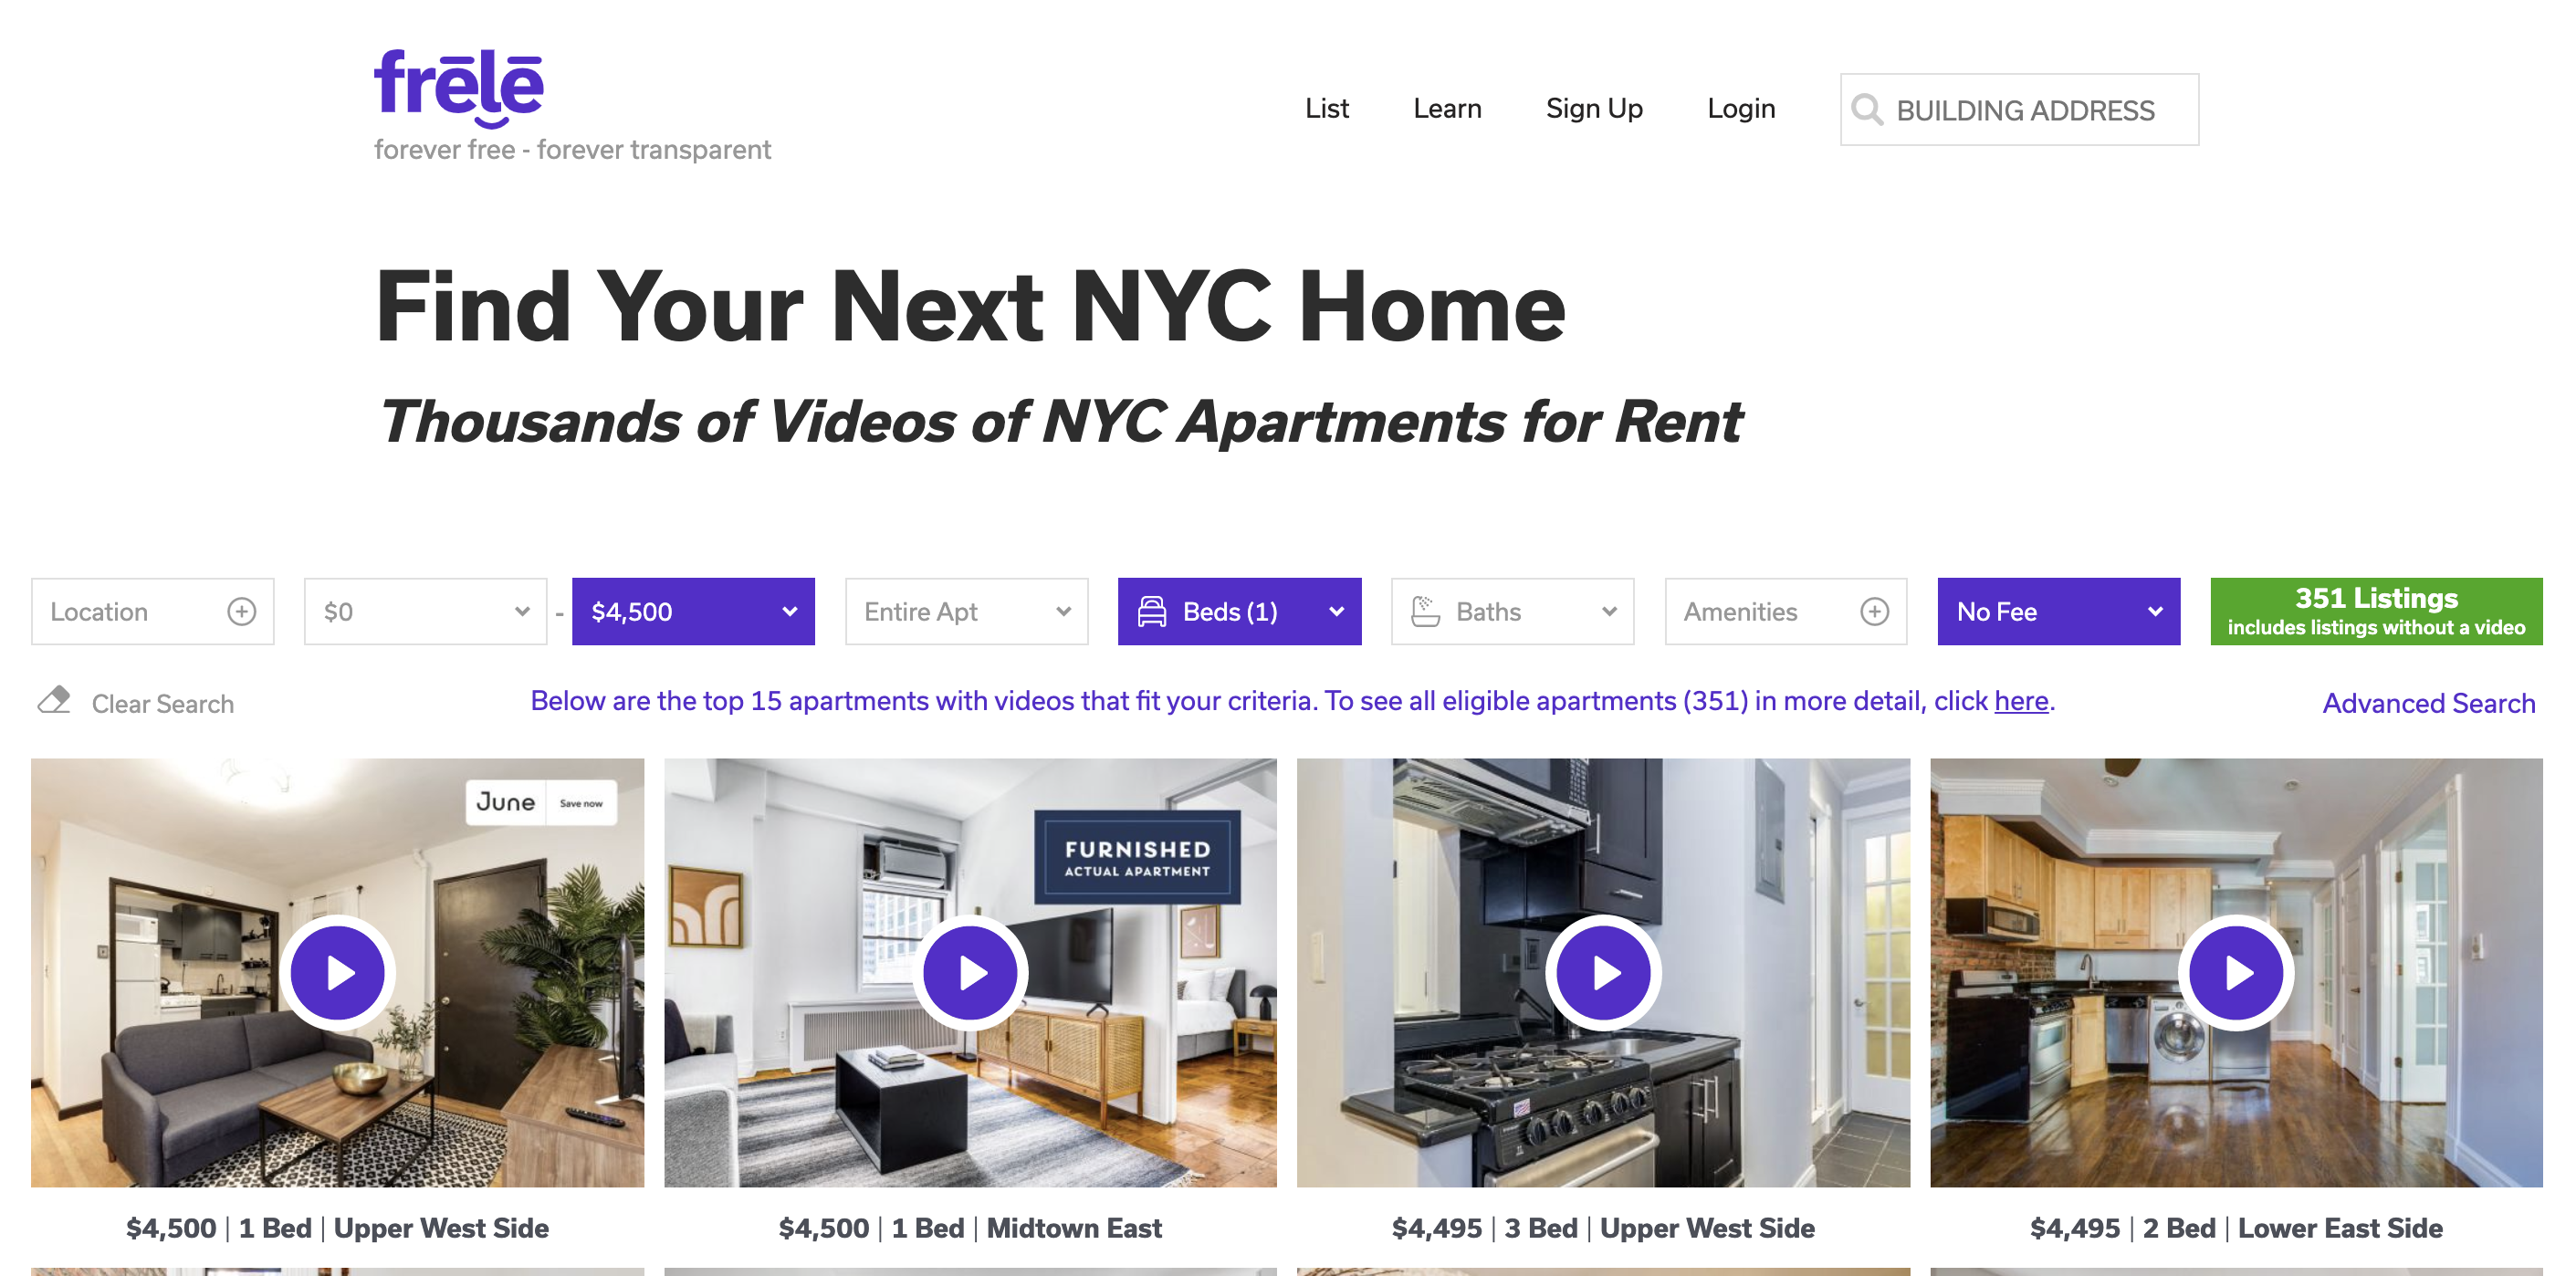 The best websites to help you find the perfect apartment